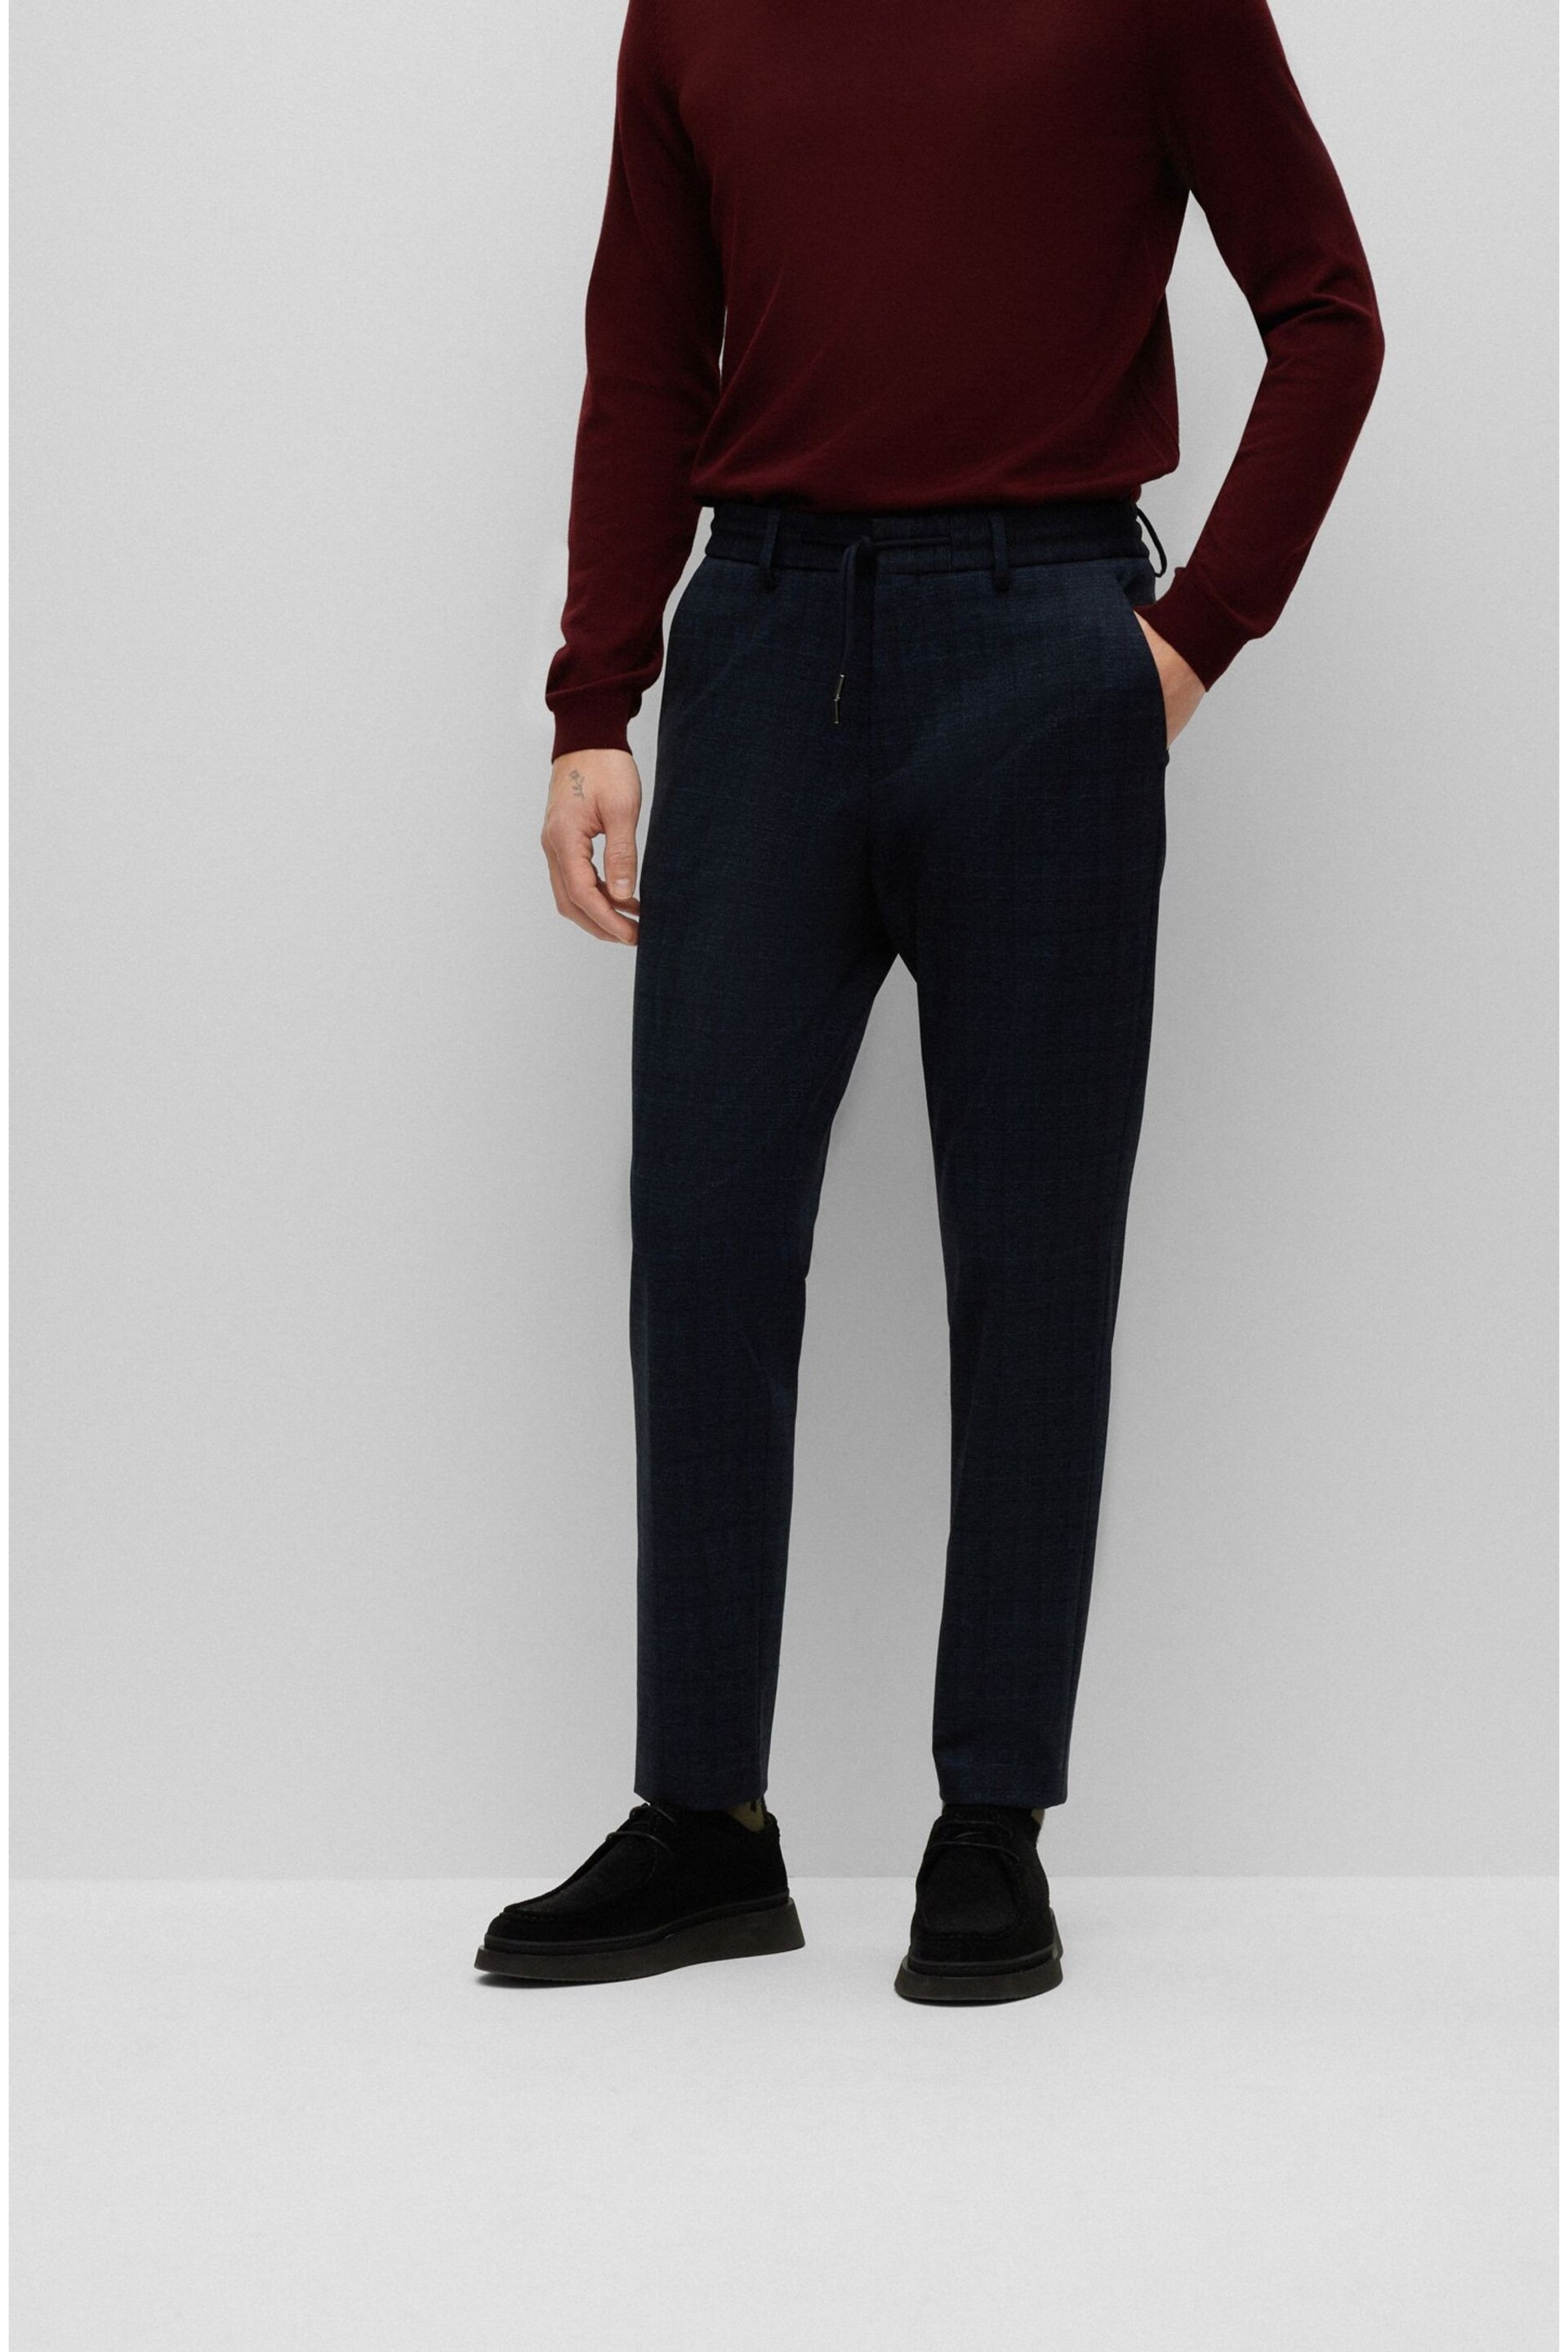 BOSS Dark Blue Tapered Fit Contempory Check Trousers - Image 1 of 5